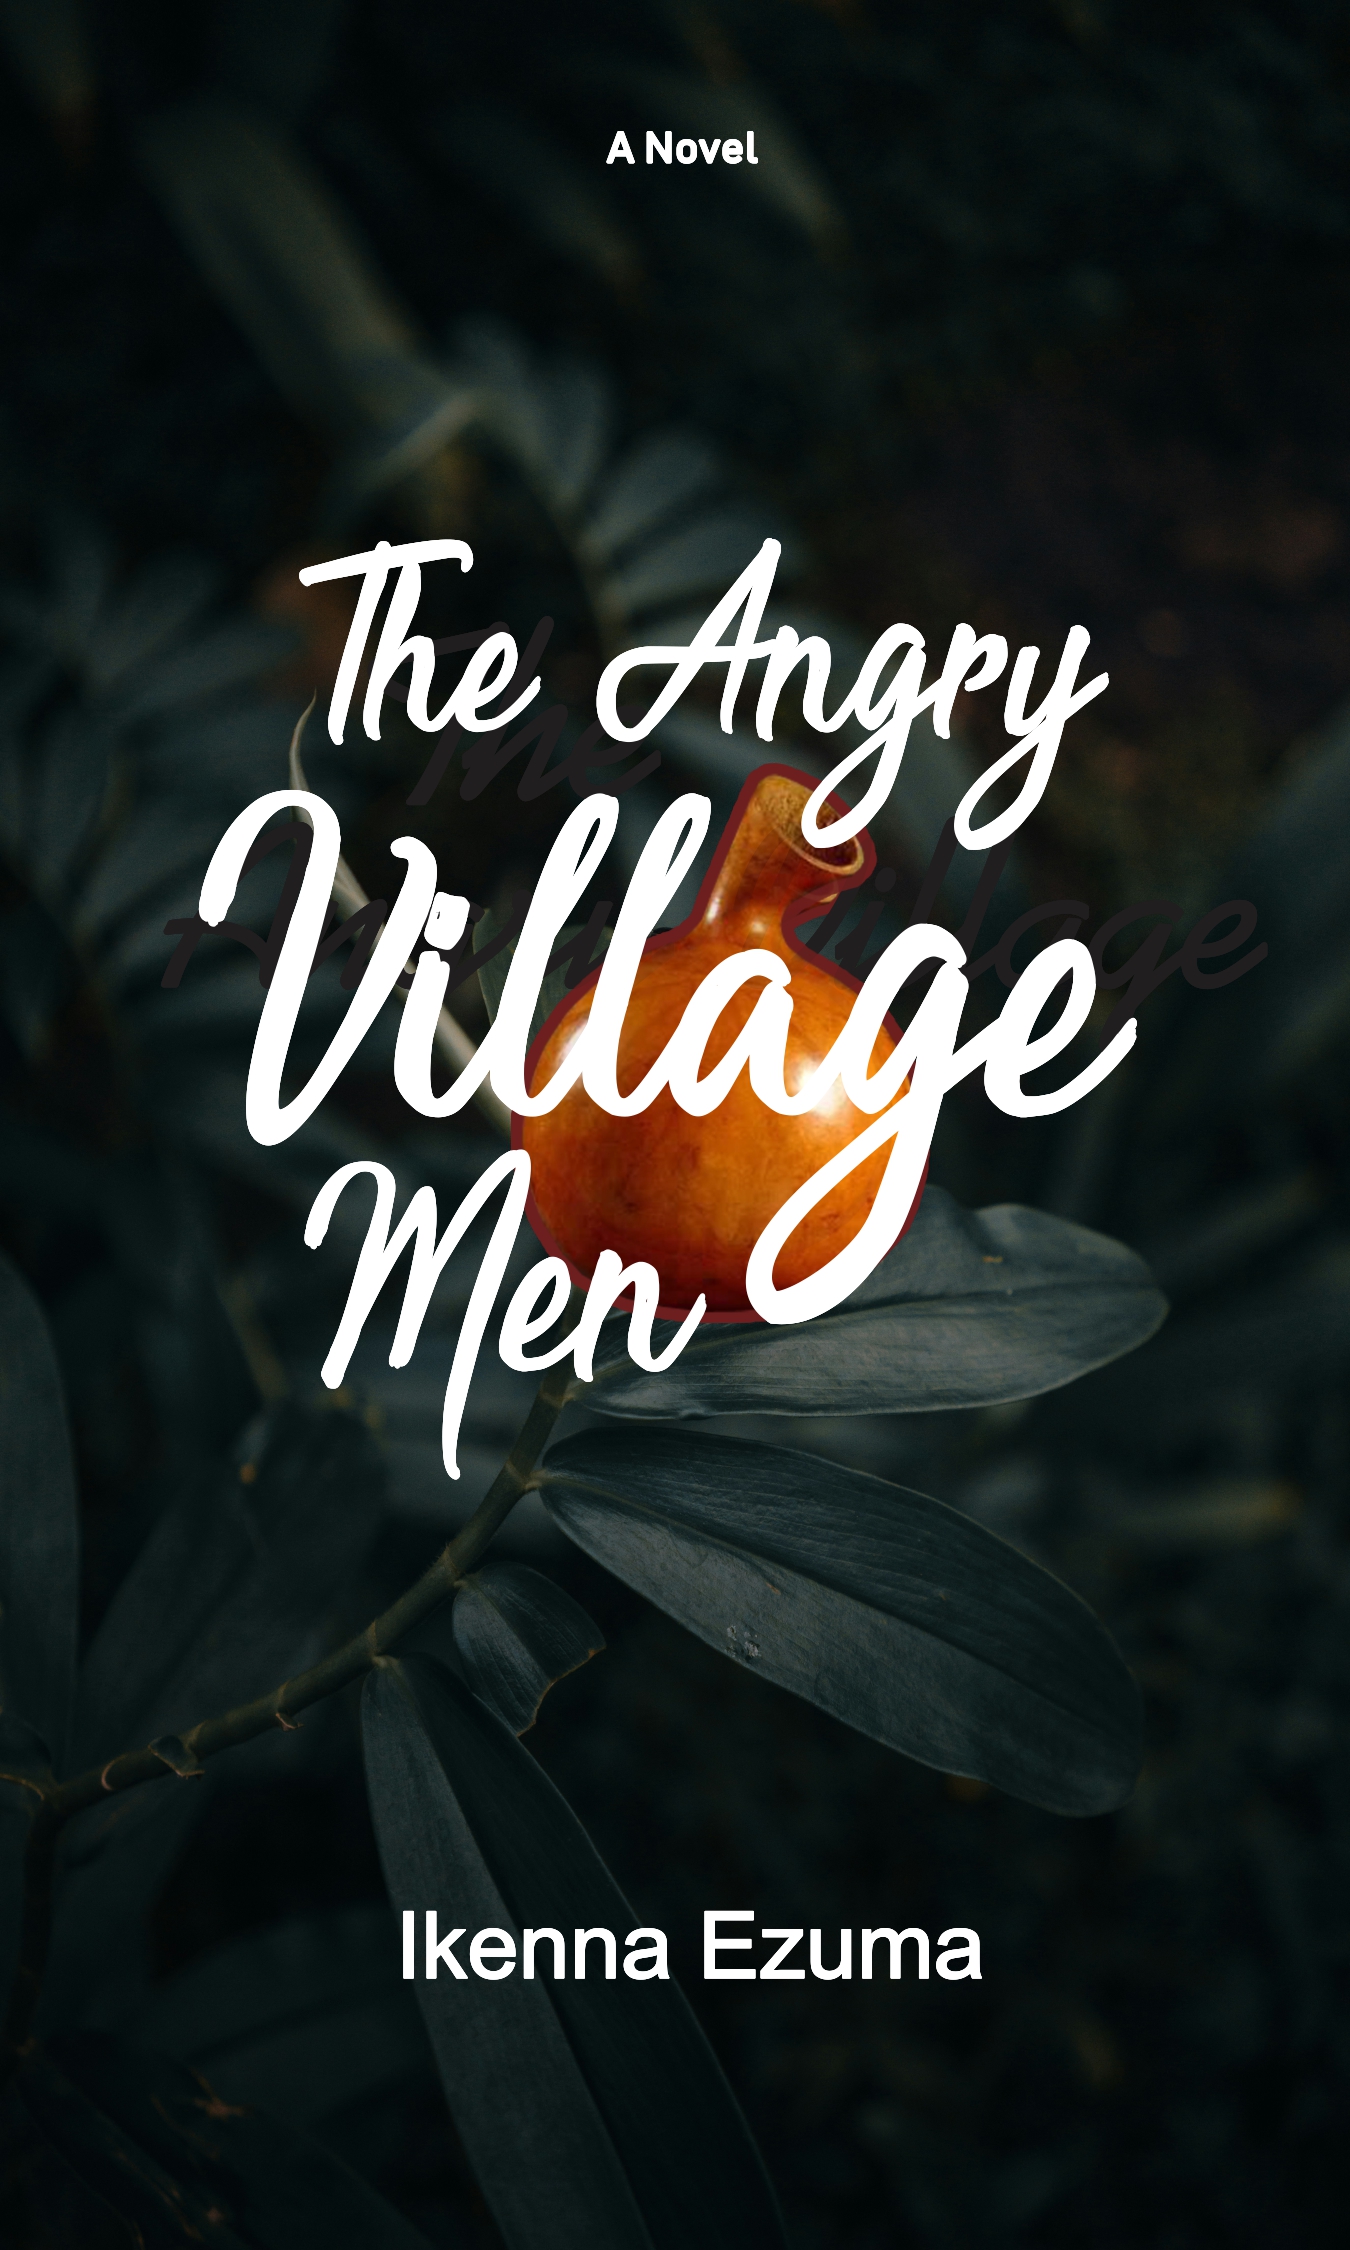 The-Angry-Village-Men